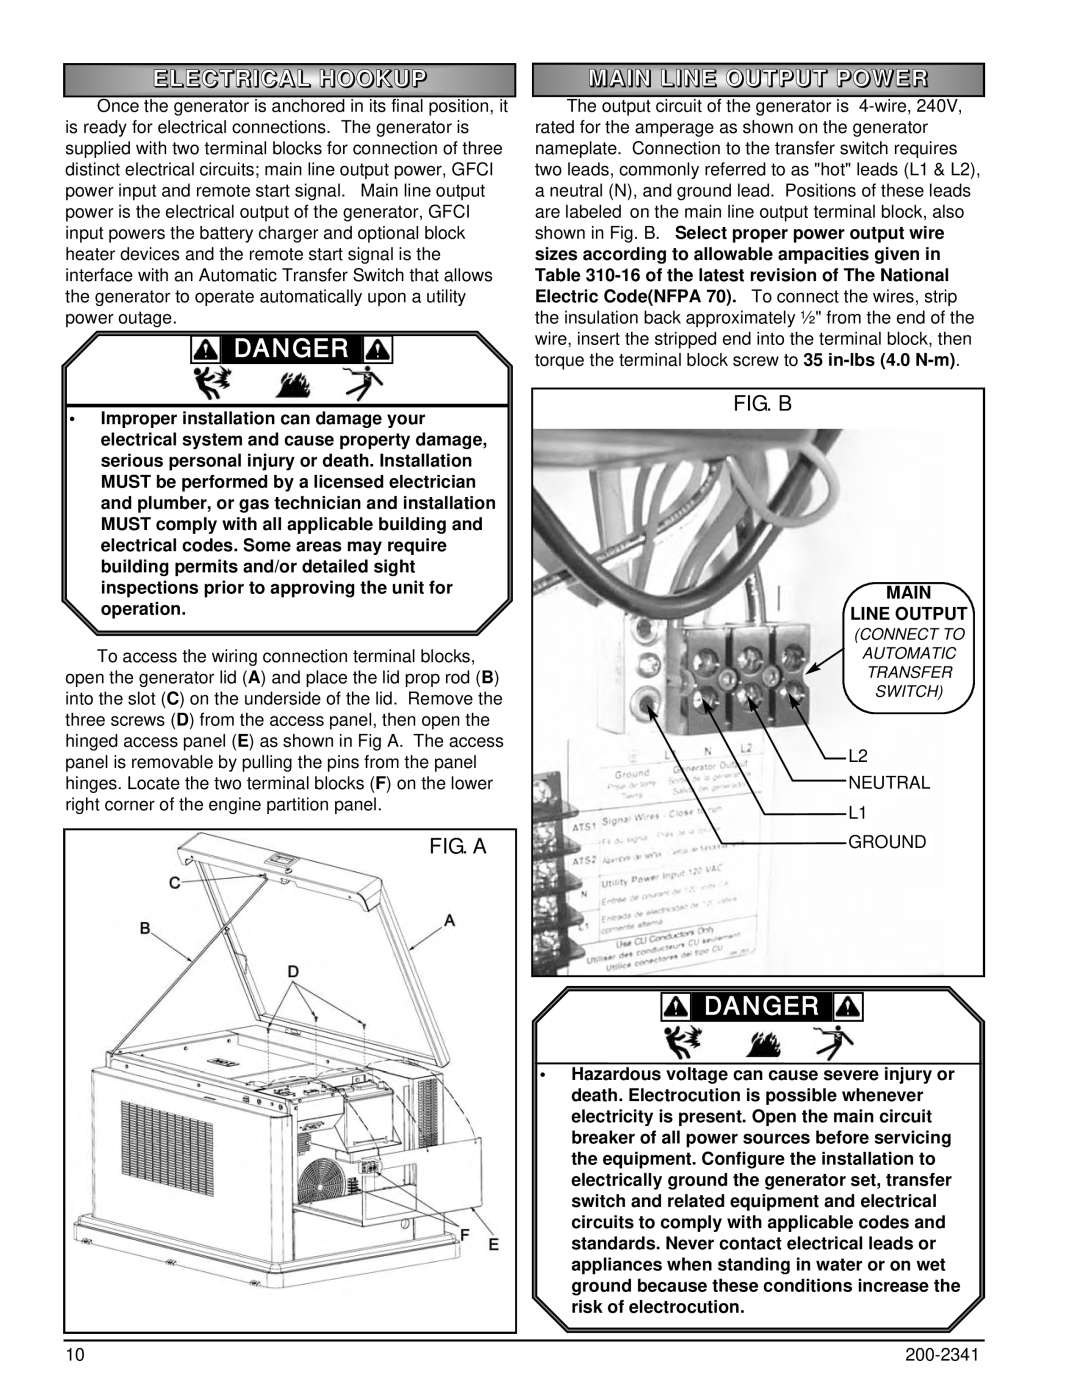 Powermate PM400911 owner manual Danger, Electrical Hookup, Main Line Output Power, Fig. A, Fig. B 